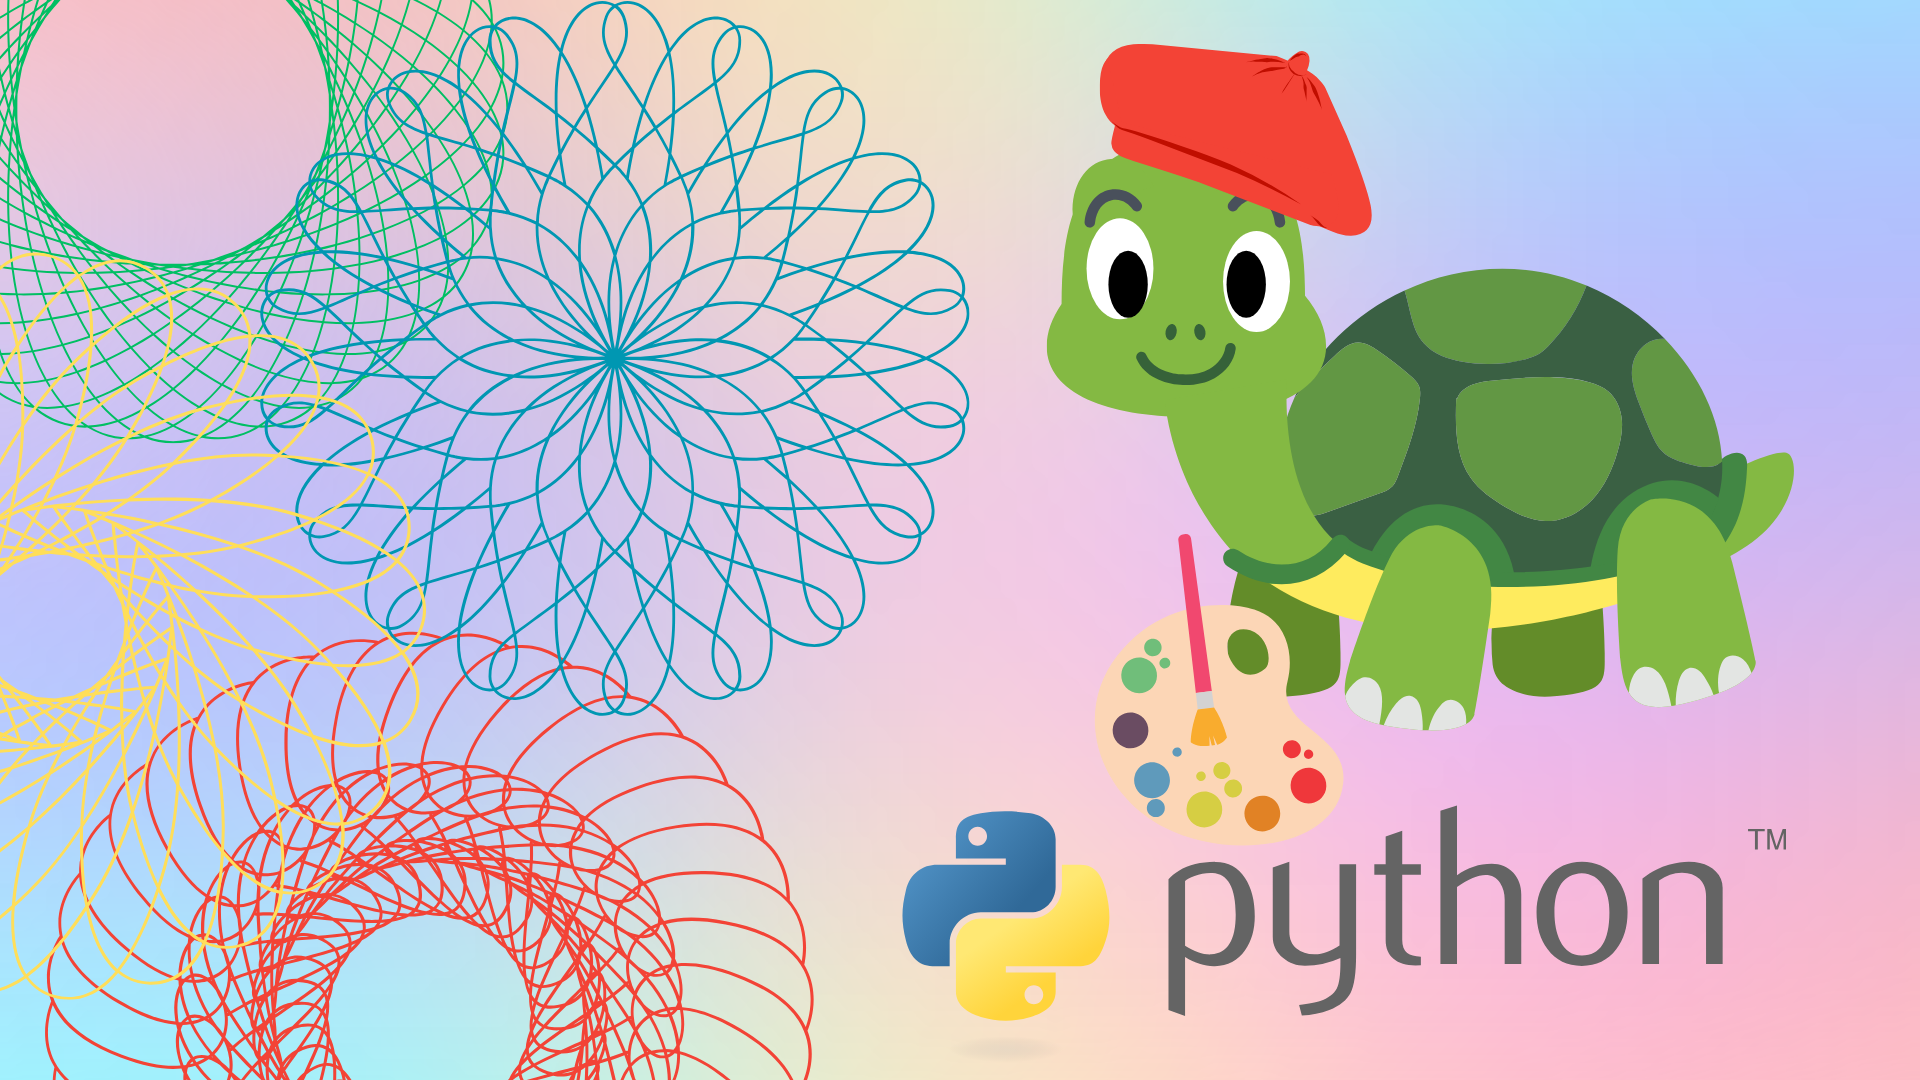 Spirograph art on the left next to a cartoon image of a turtle in an artist's beret holding a paint pallette. The logo for Python coding is also included.